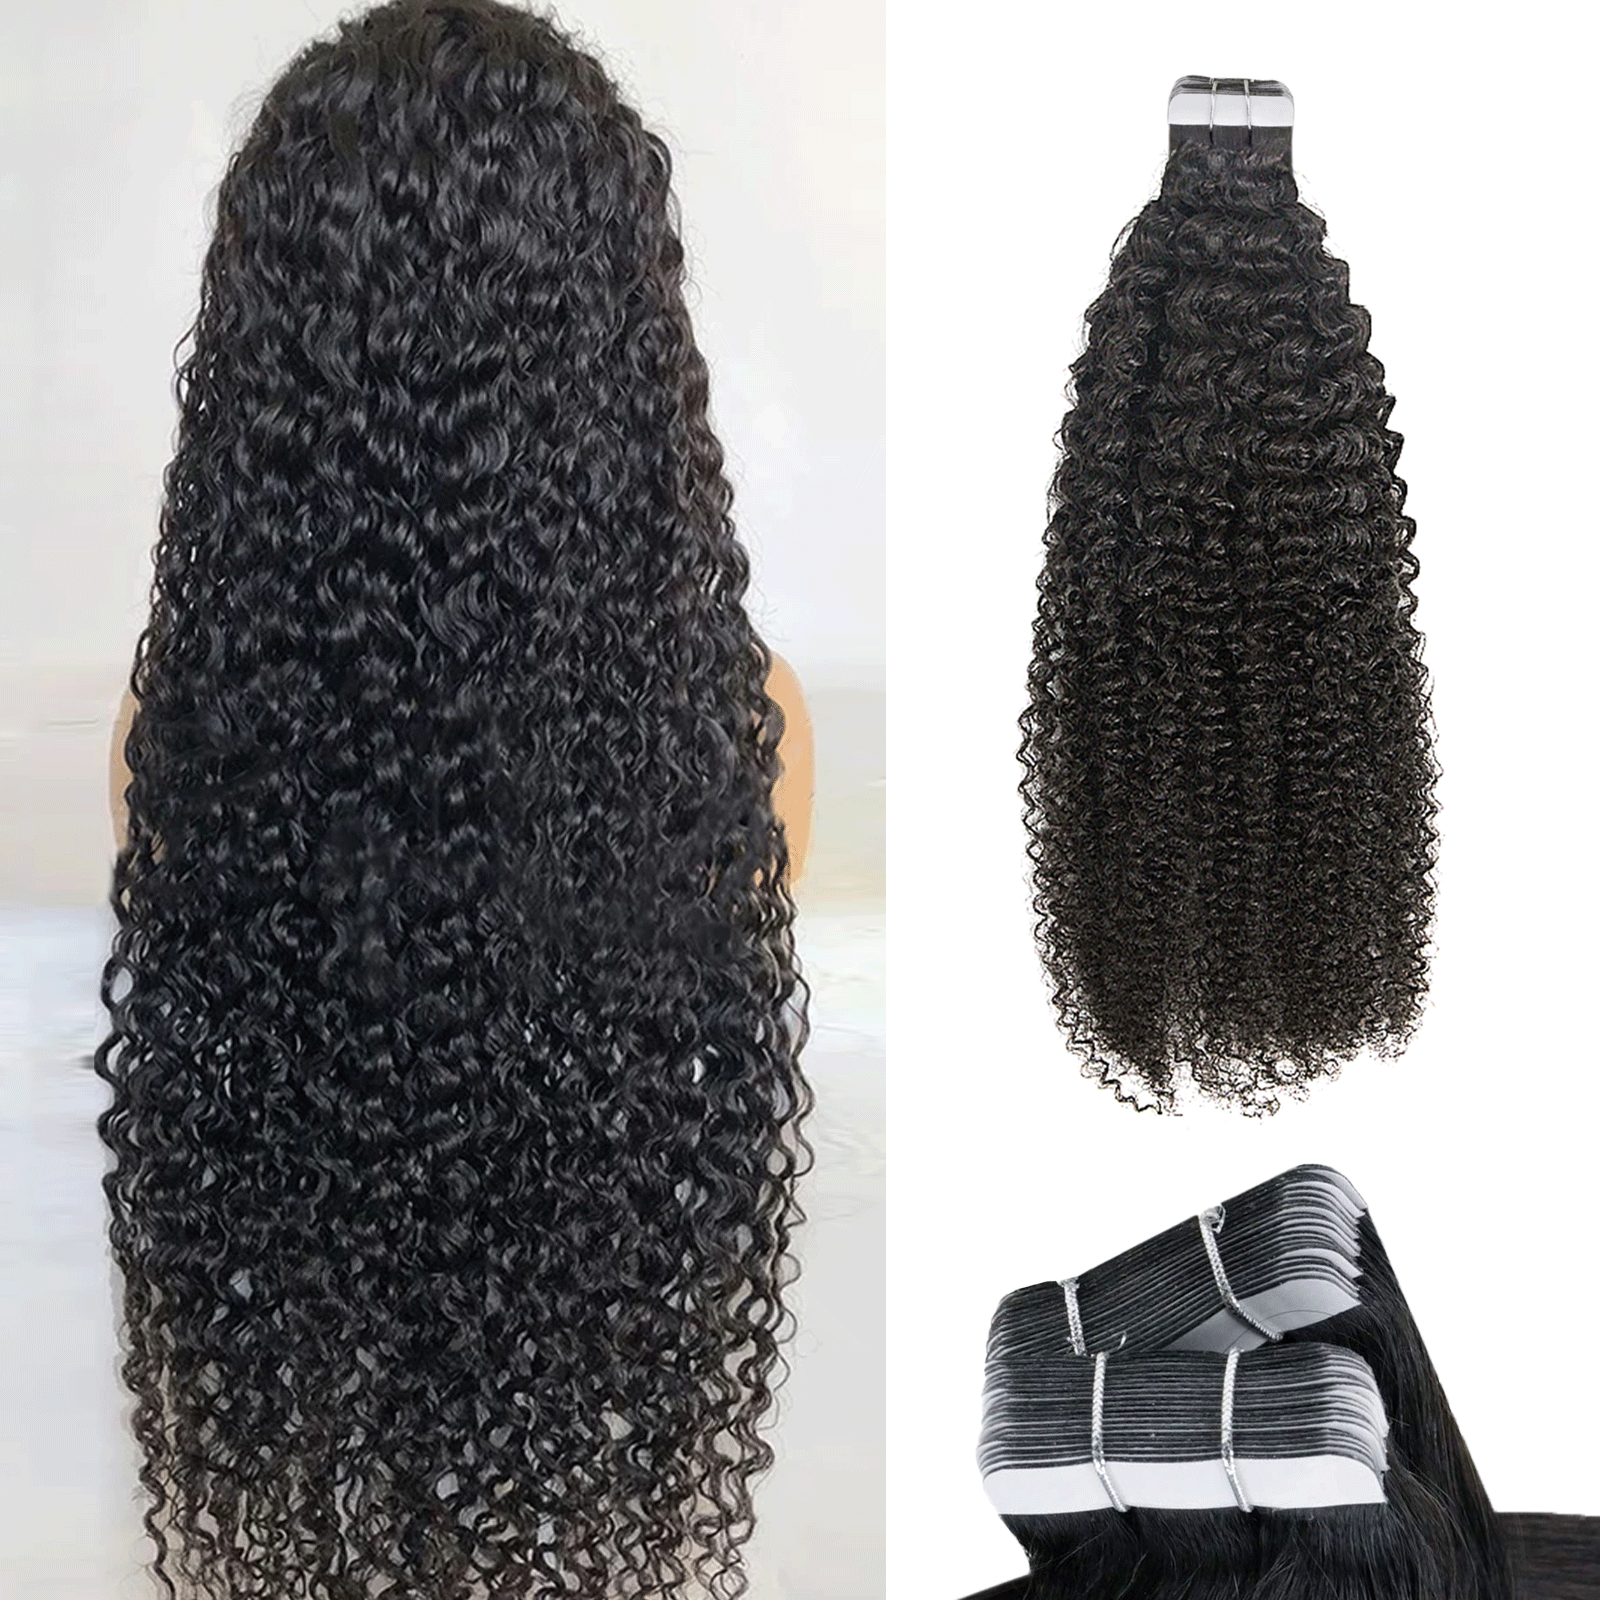 Tape Hair 3 Bundles (60pcs) for a package